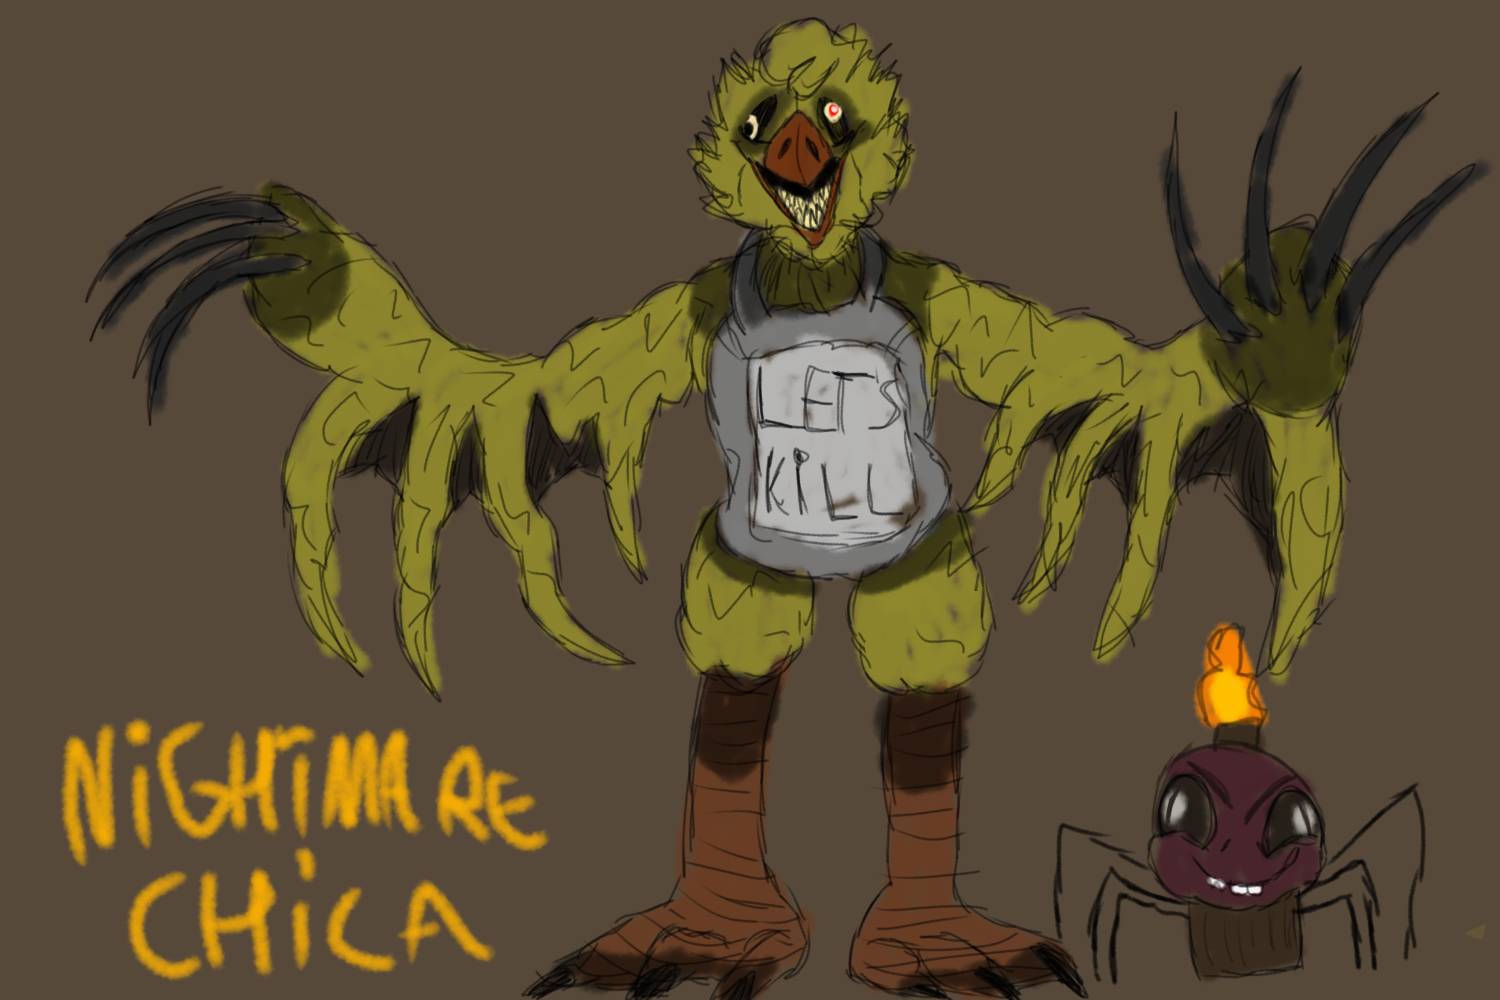 Fnaf 2  Withered Chica by QuelendUnderground on DeviantArt